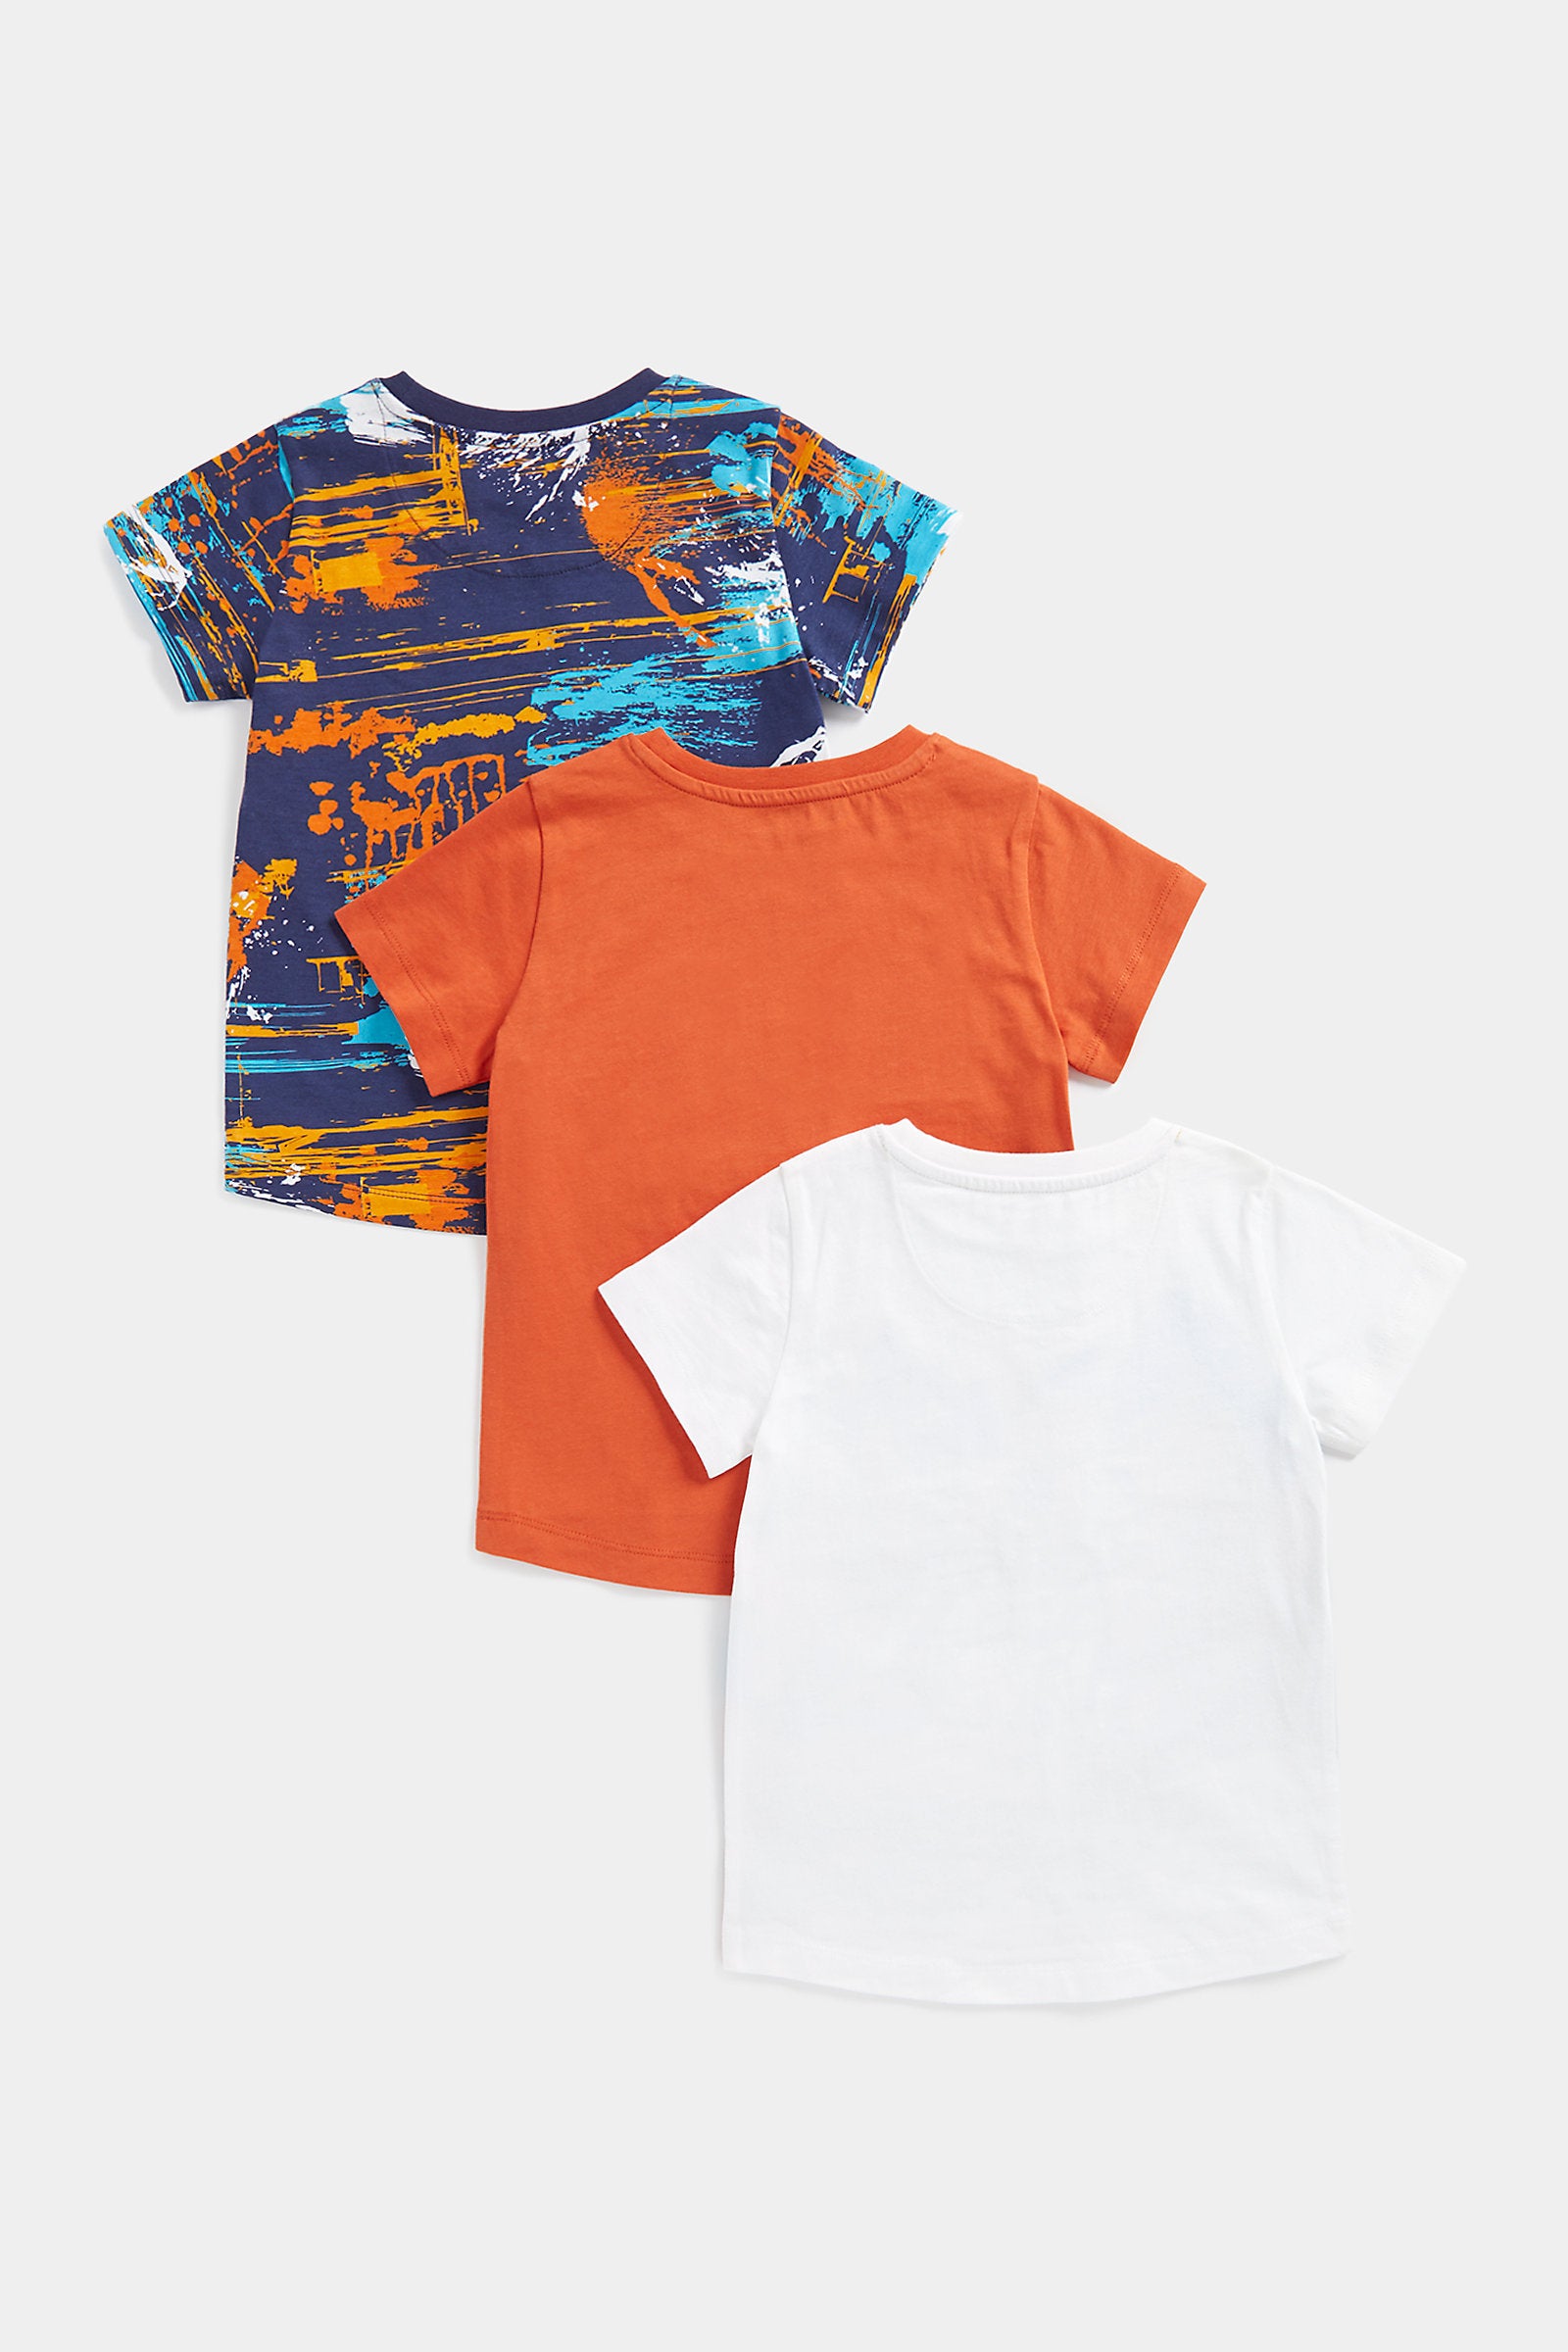 Mothercare Skate T-Shirts - 3 Pack